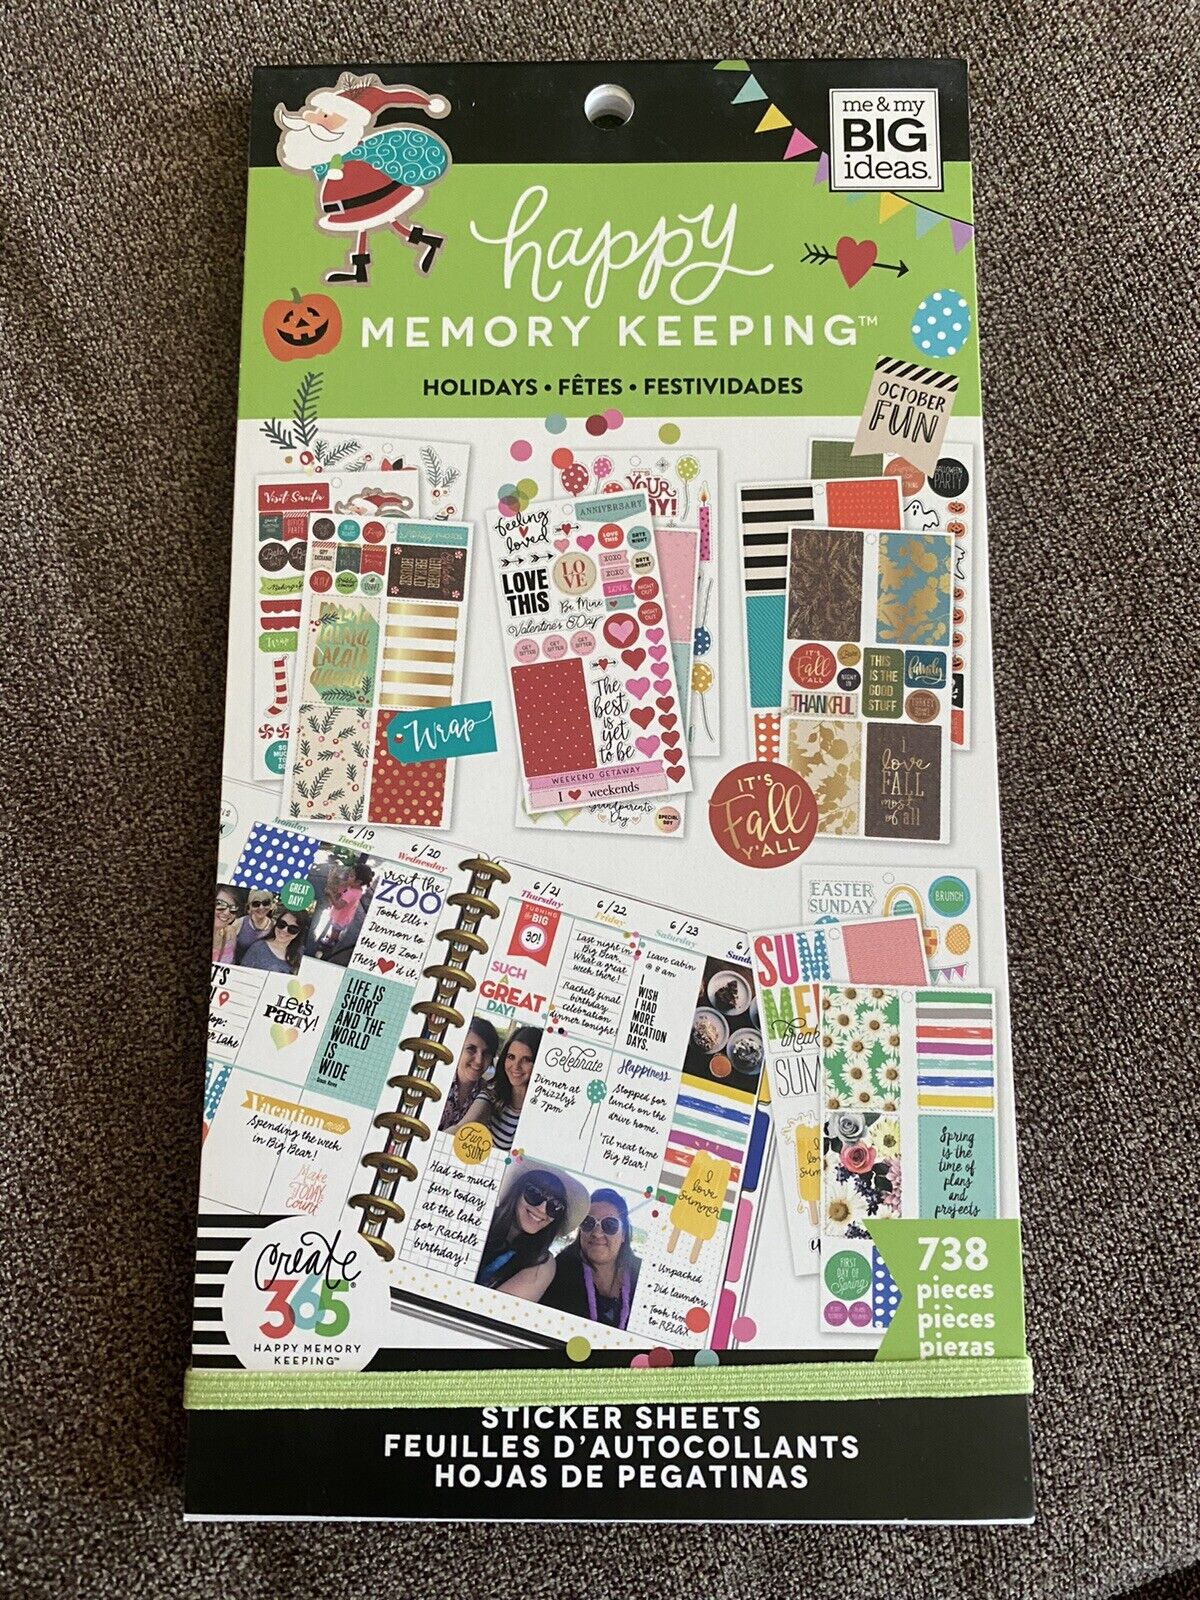 Happy Planner Keeping Holiday Memories Sticker Book 738 Pieces